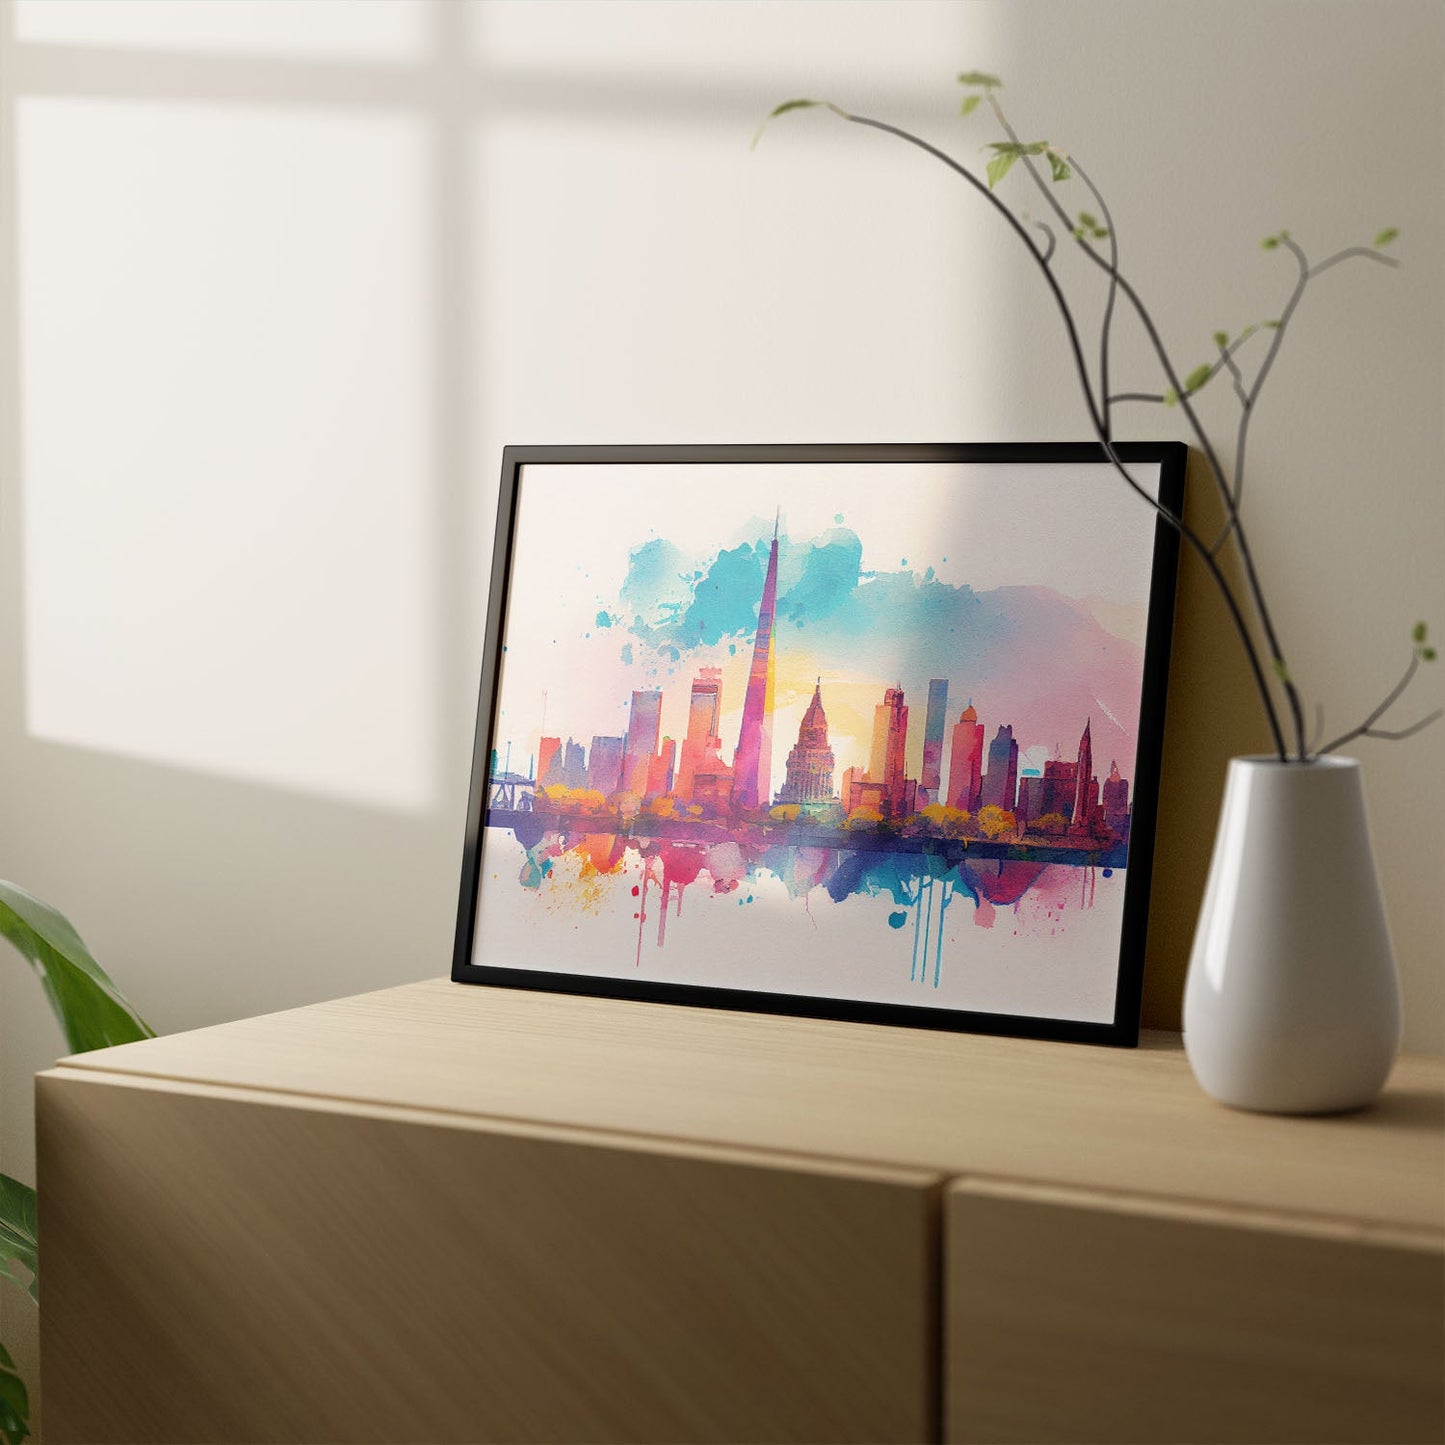 Nacnic watercolor of a skyline of the city of Buenos Aires_1. Aesthetic Wall Art Prints for Bedroom or Living Room Design.-Artwork-Nacnic-A4-Sin Marco-Nacnic Estudio SL